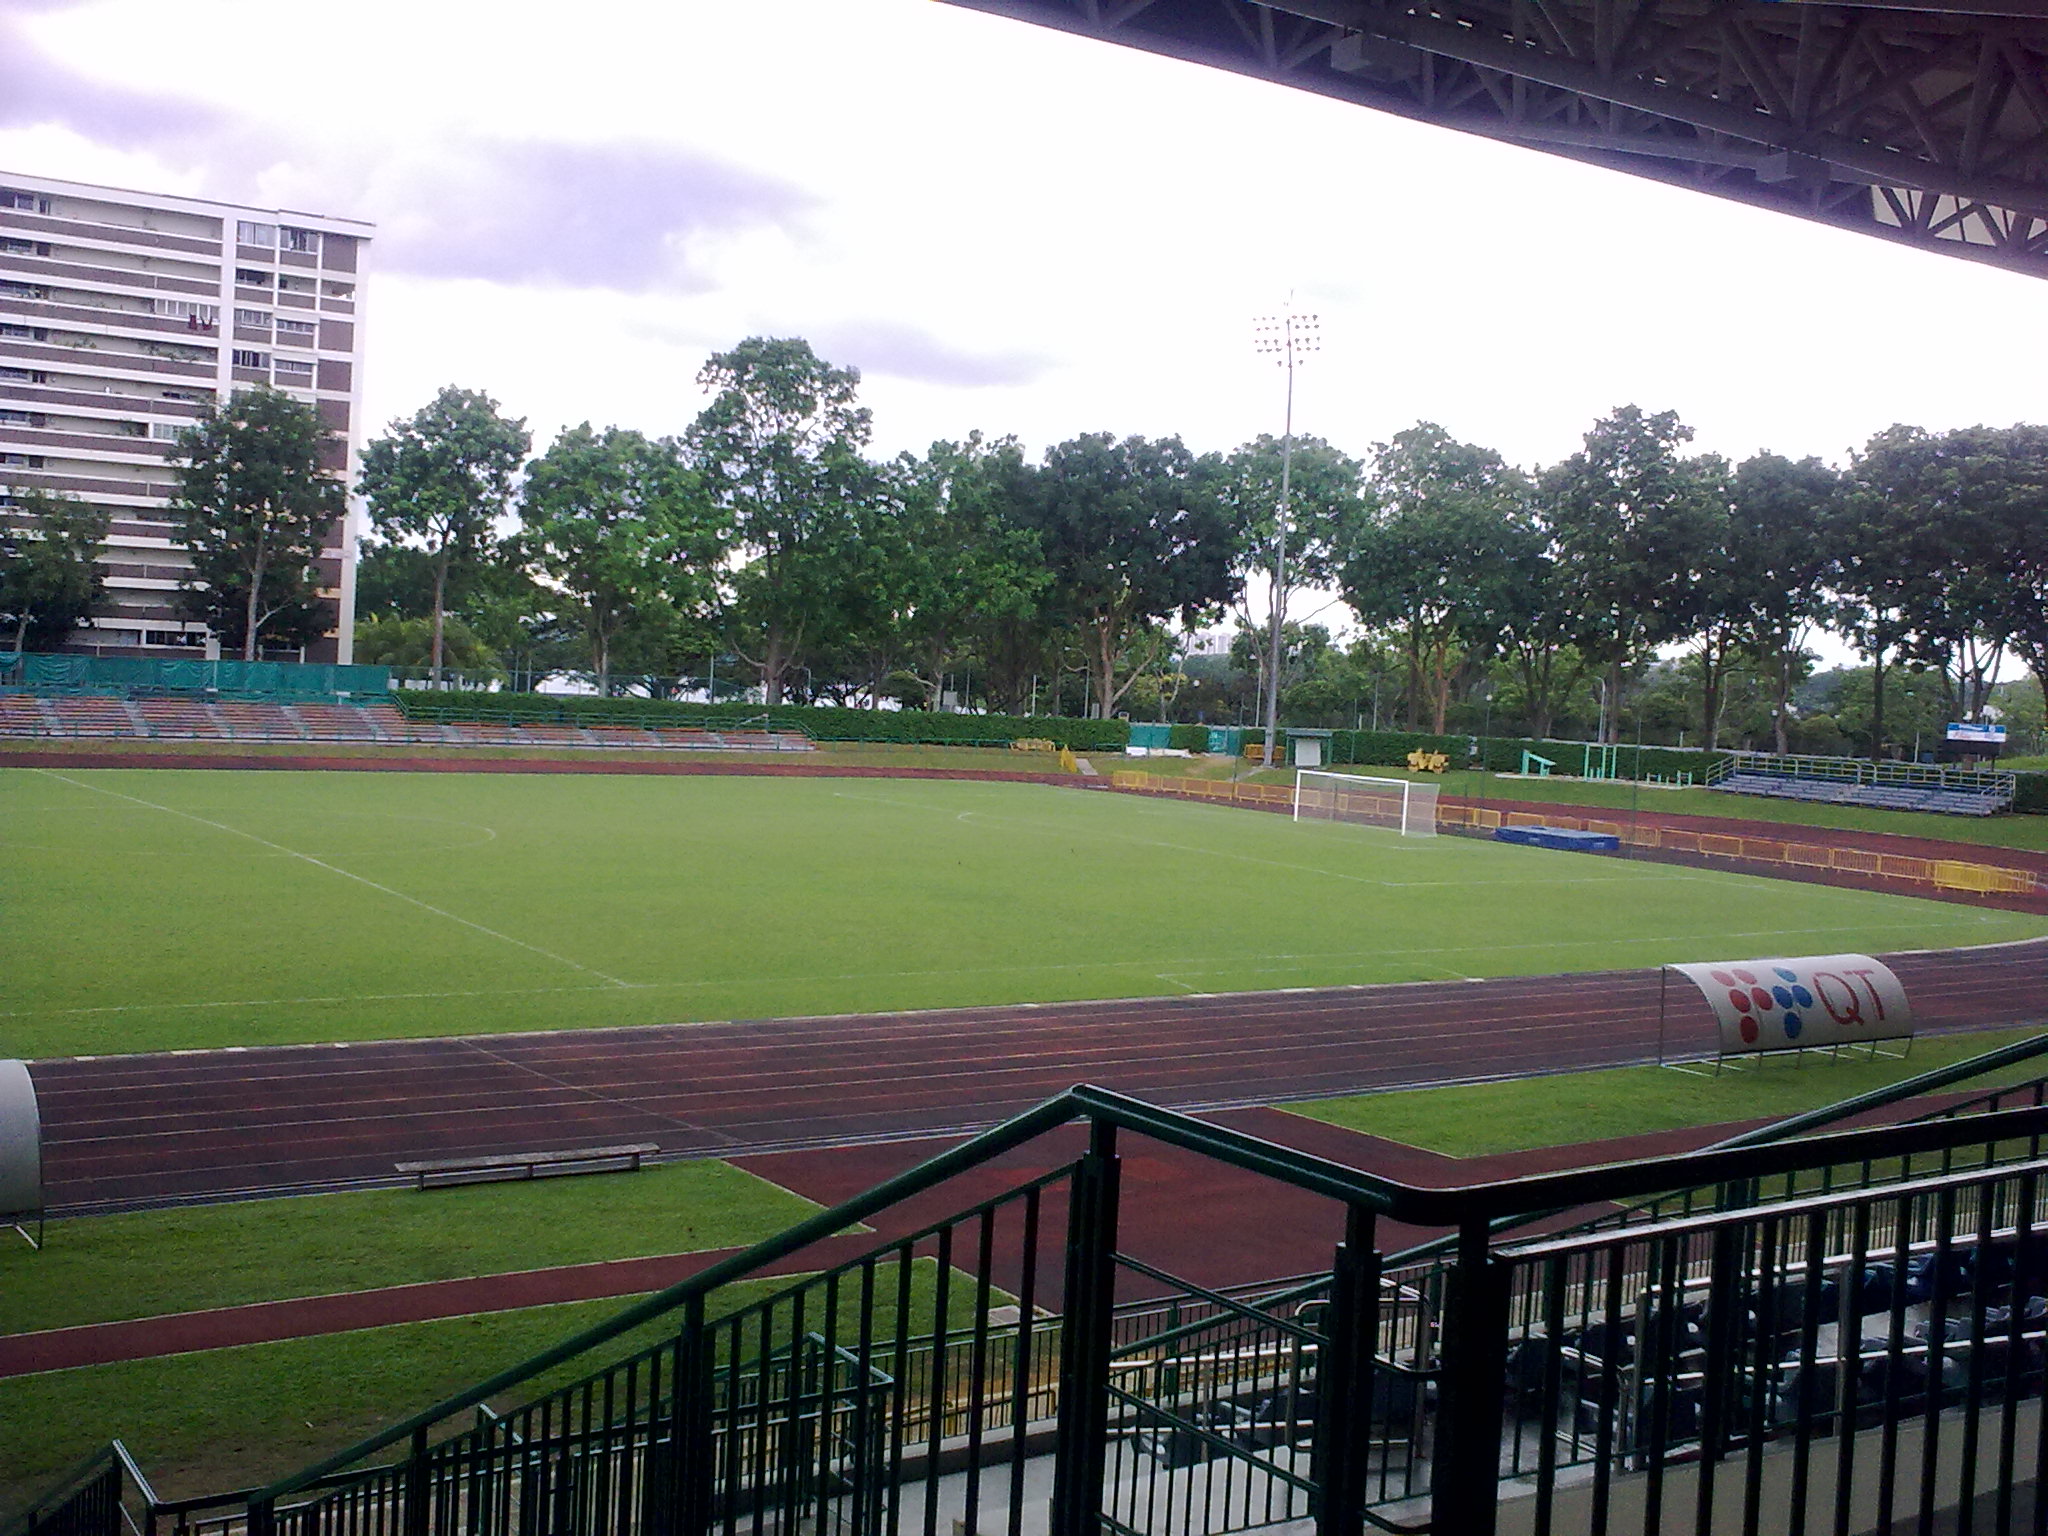 an outdoor stadium is shown as if for an event